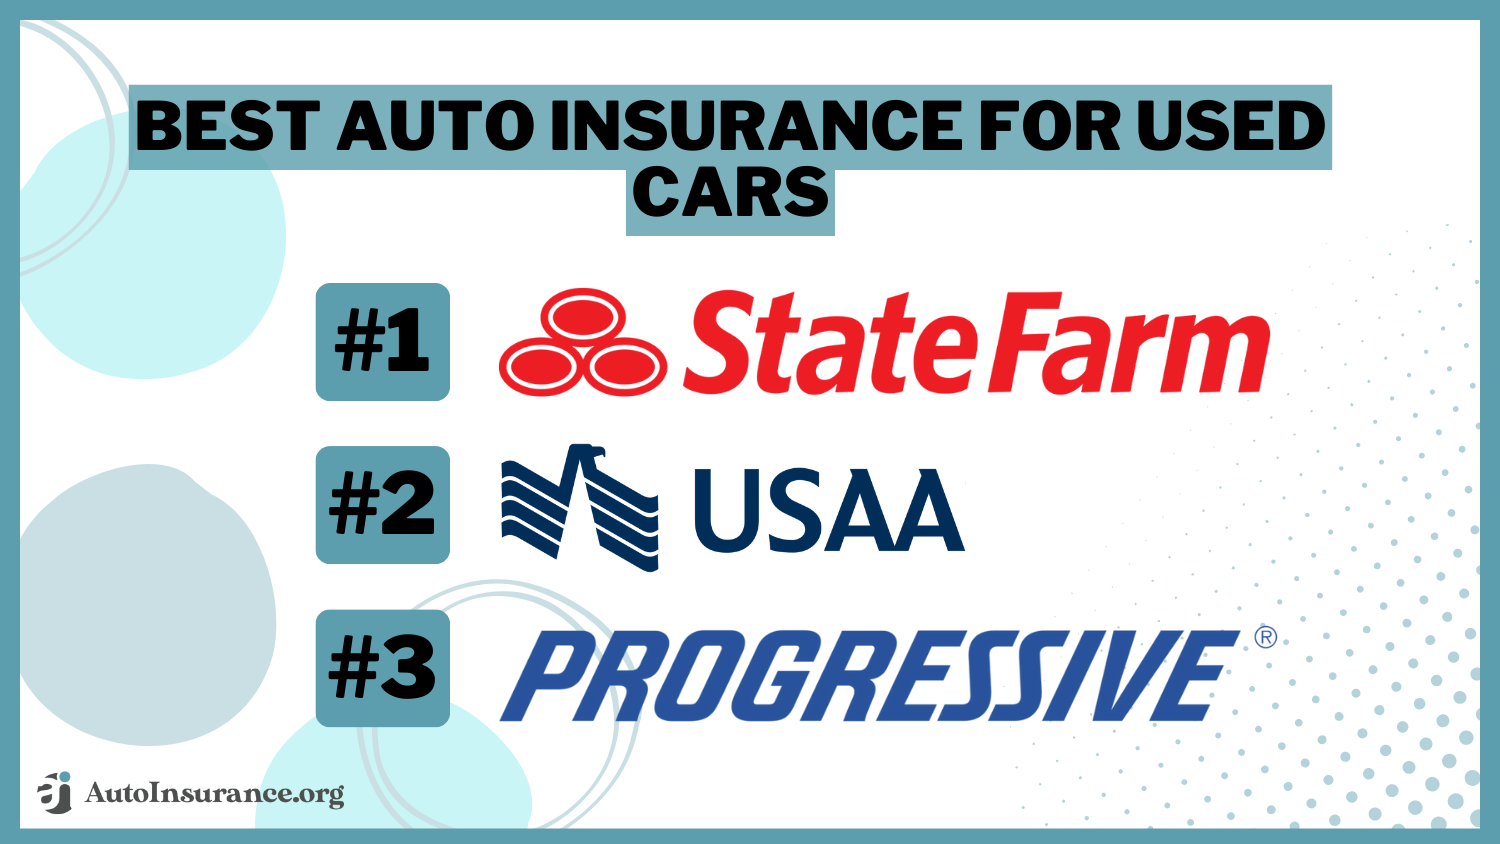 Best Auto Insurance for Used Cars: State Farm, USAA, and Progressive